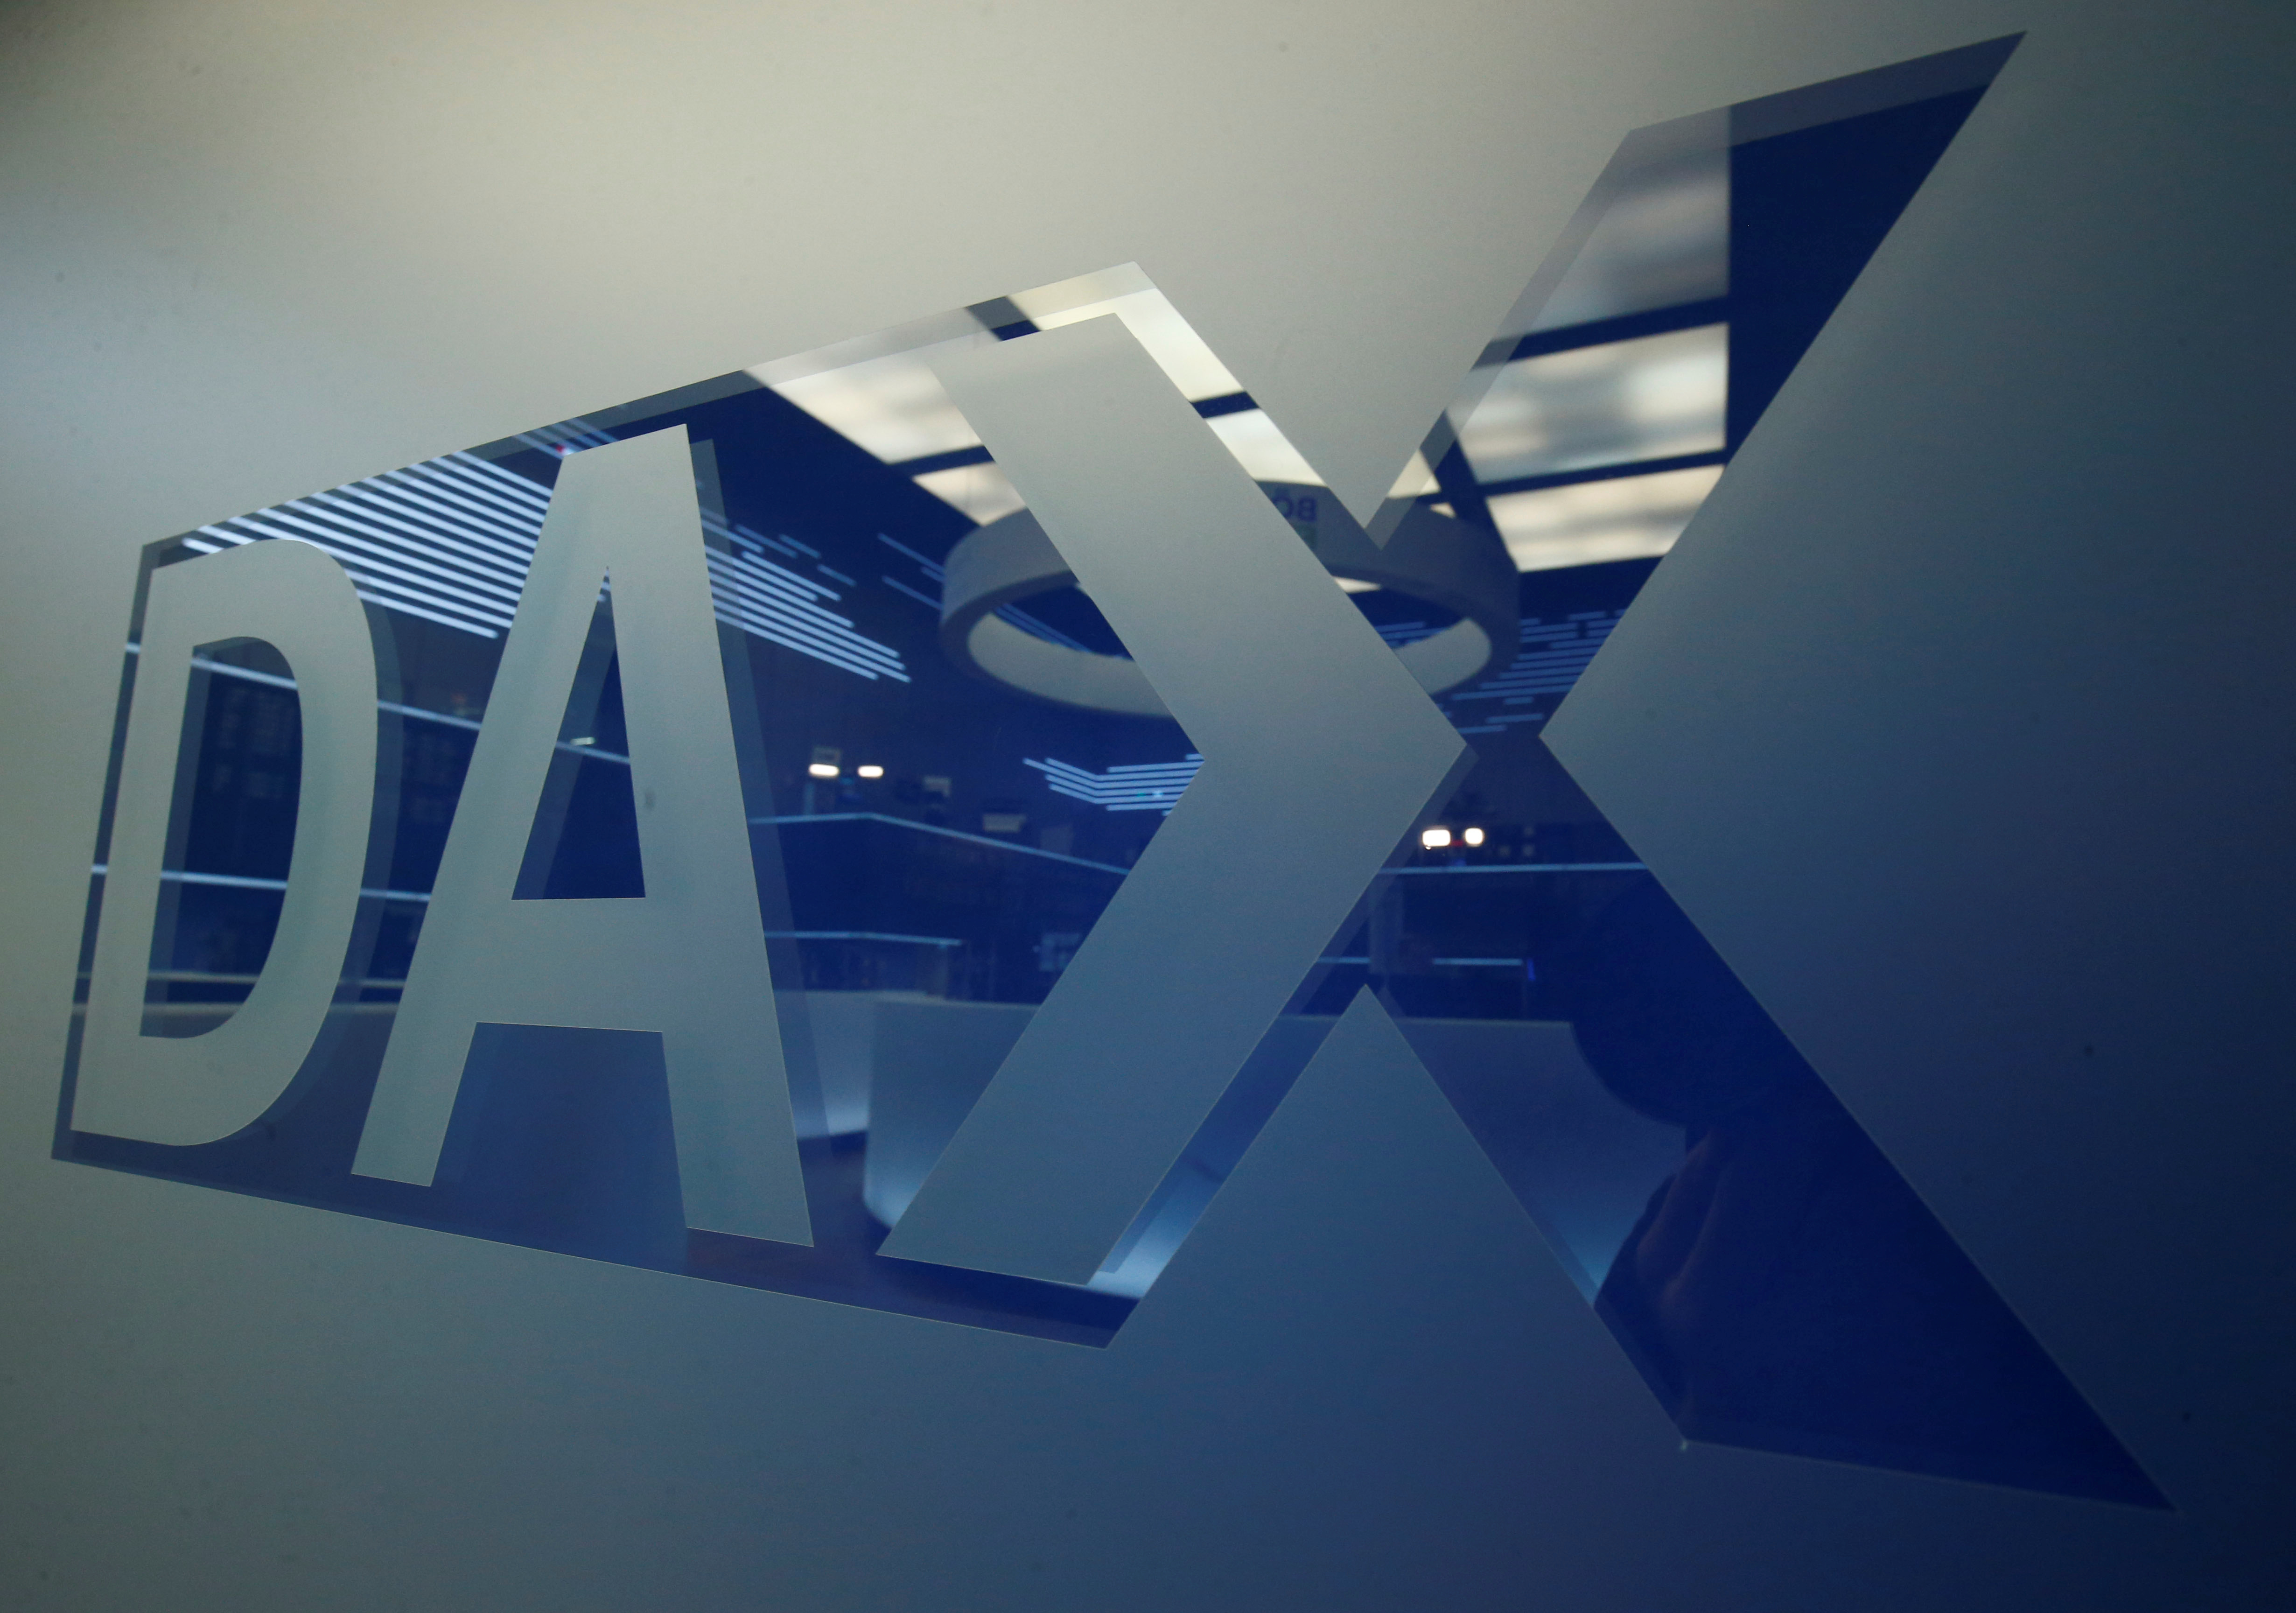 A DAX logo is pictured at the trading floor of the stock exchange in Frankfurt